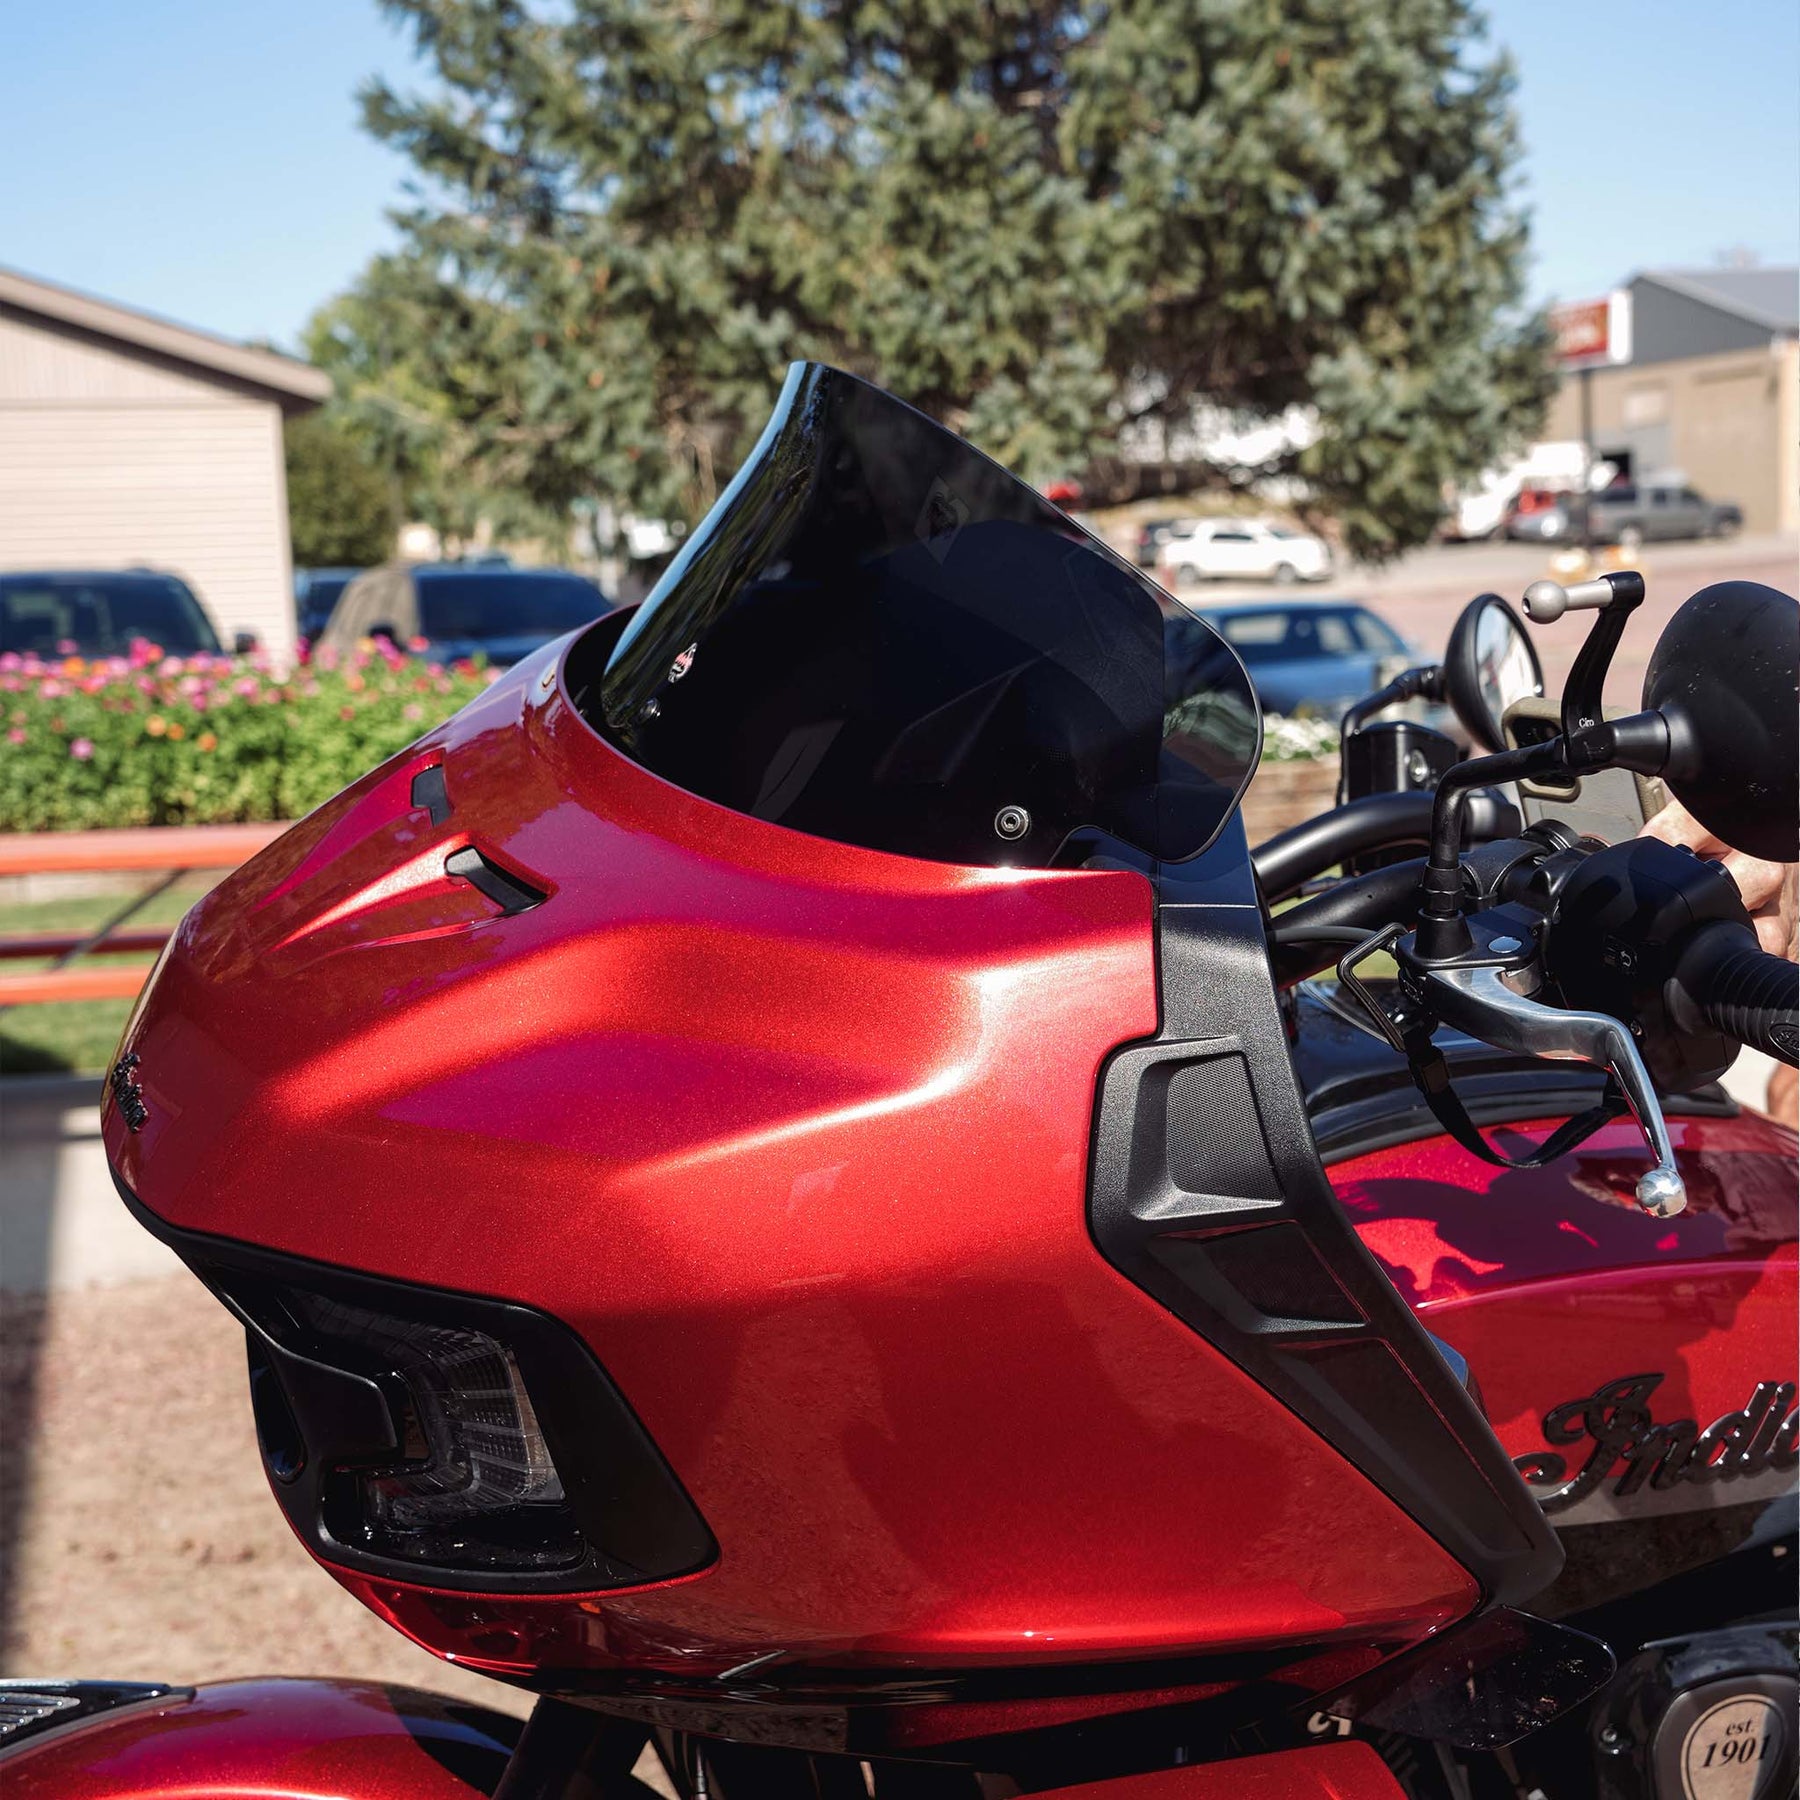 8" Dark Smoke Flare™ Windshield For 2020-2023 Indian® Challenger and Pursuit motorcycle models shown in down position